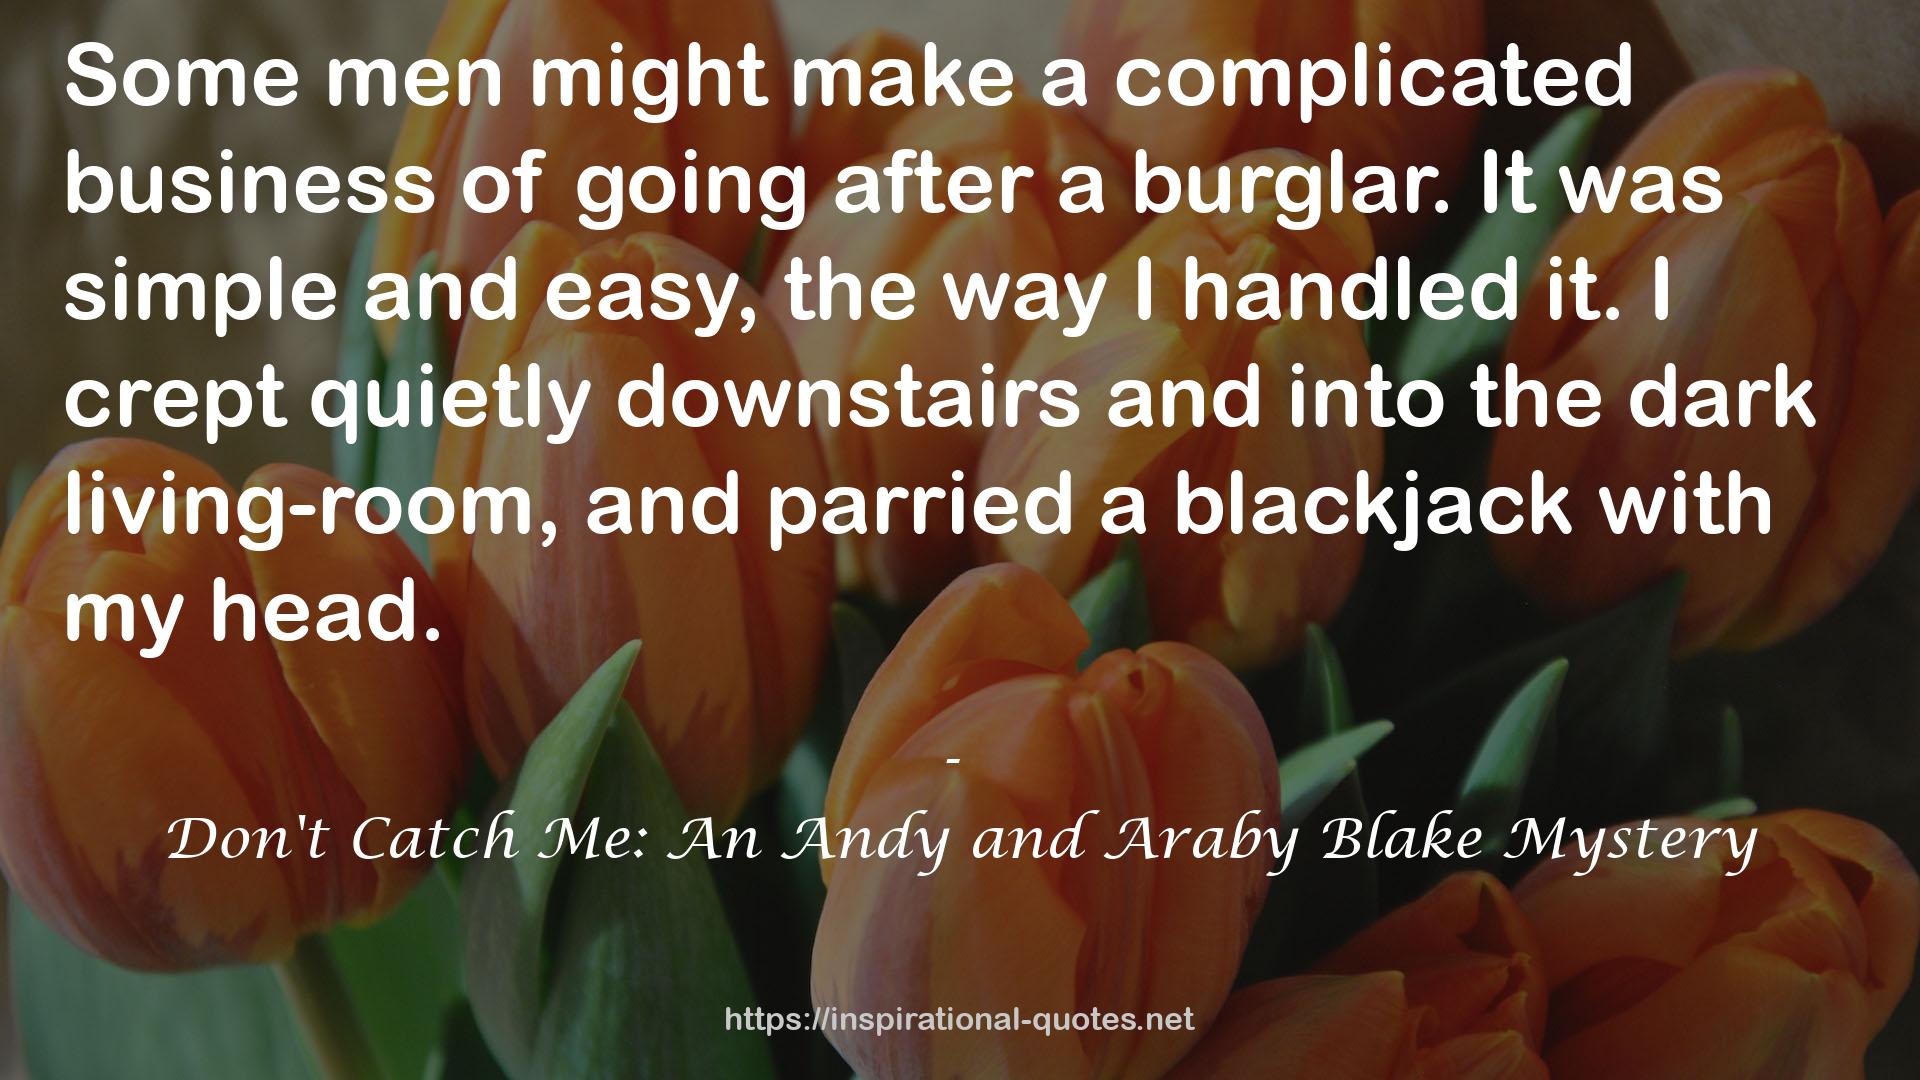 Don't Catch Me: An Andy and Araby Blake Mystery QUOTES